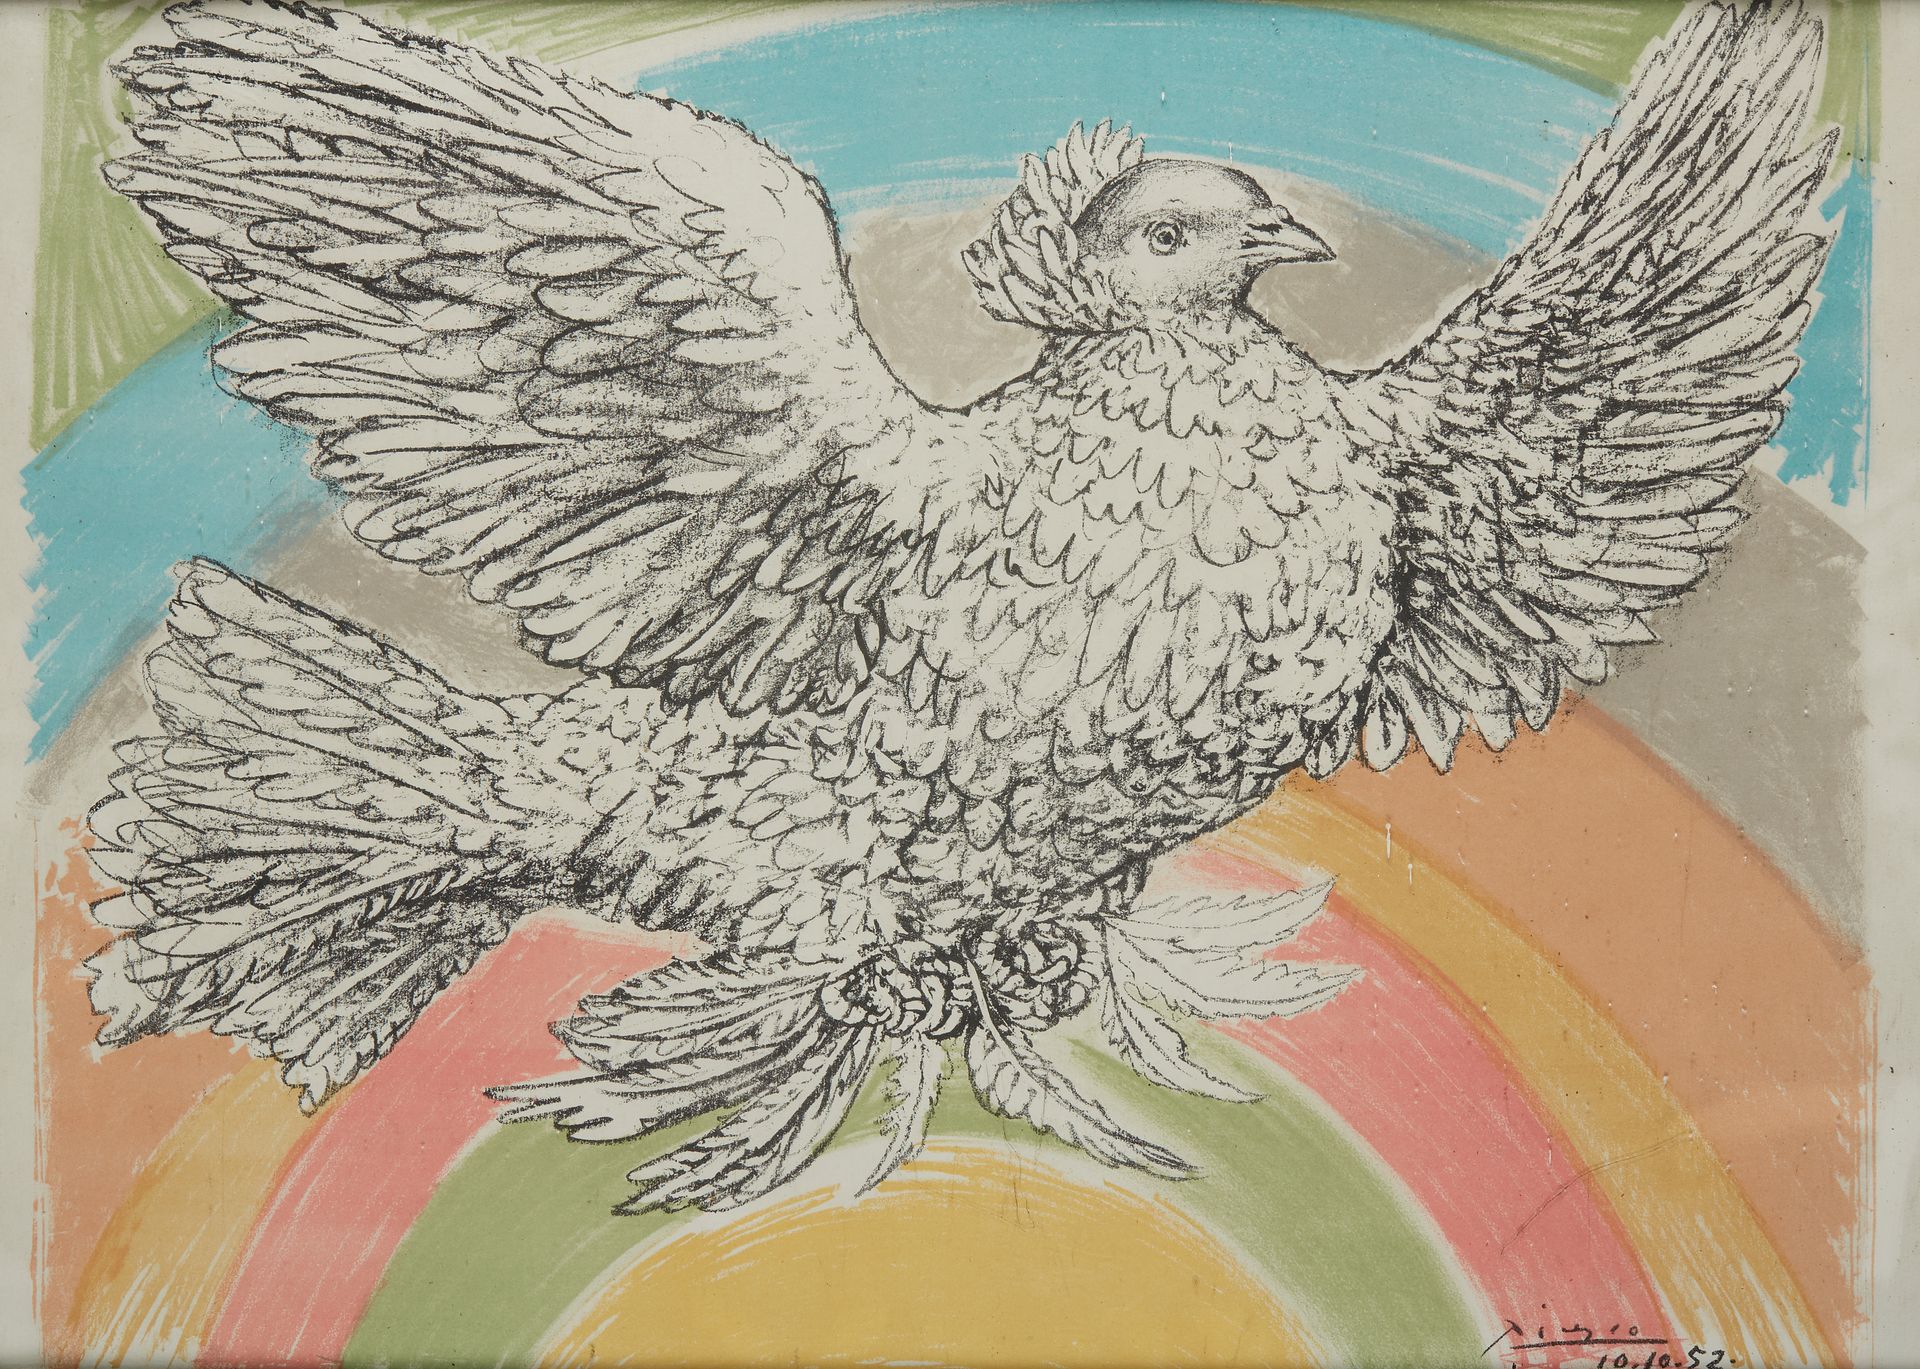 Null Pablo PICASSO (1881 - 1973)

Dove in flight with a rainbow. 10-10-52.

Lith&hellip;